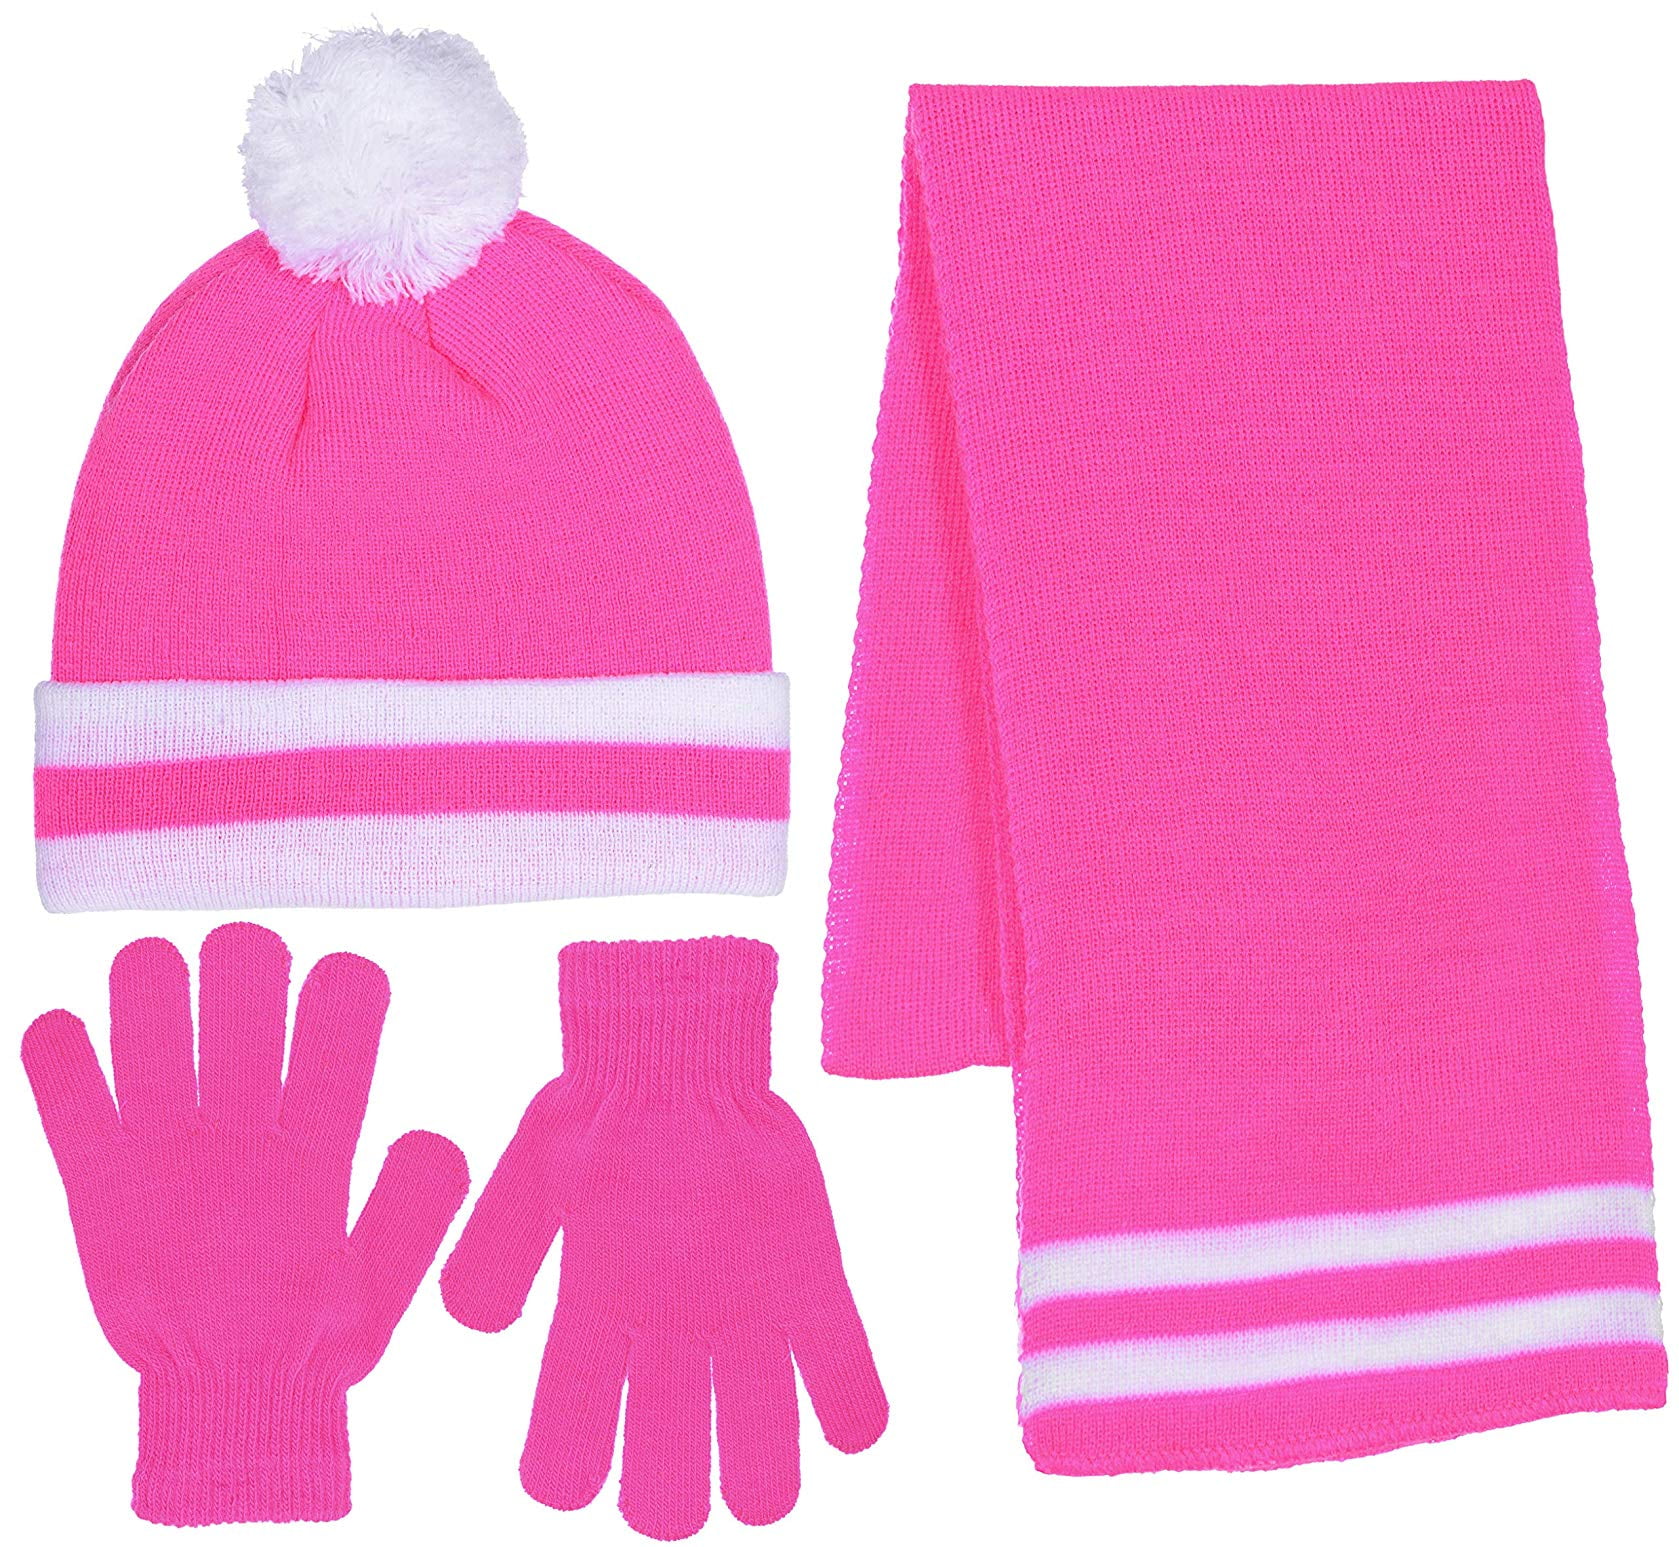 S.W.A.K Kids Girls Knit Pompom Beanie Hat Scarf and Gloves Set One Size Fits Most See More Colors 